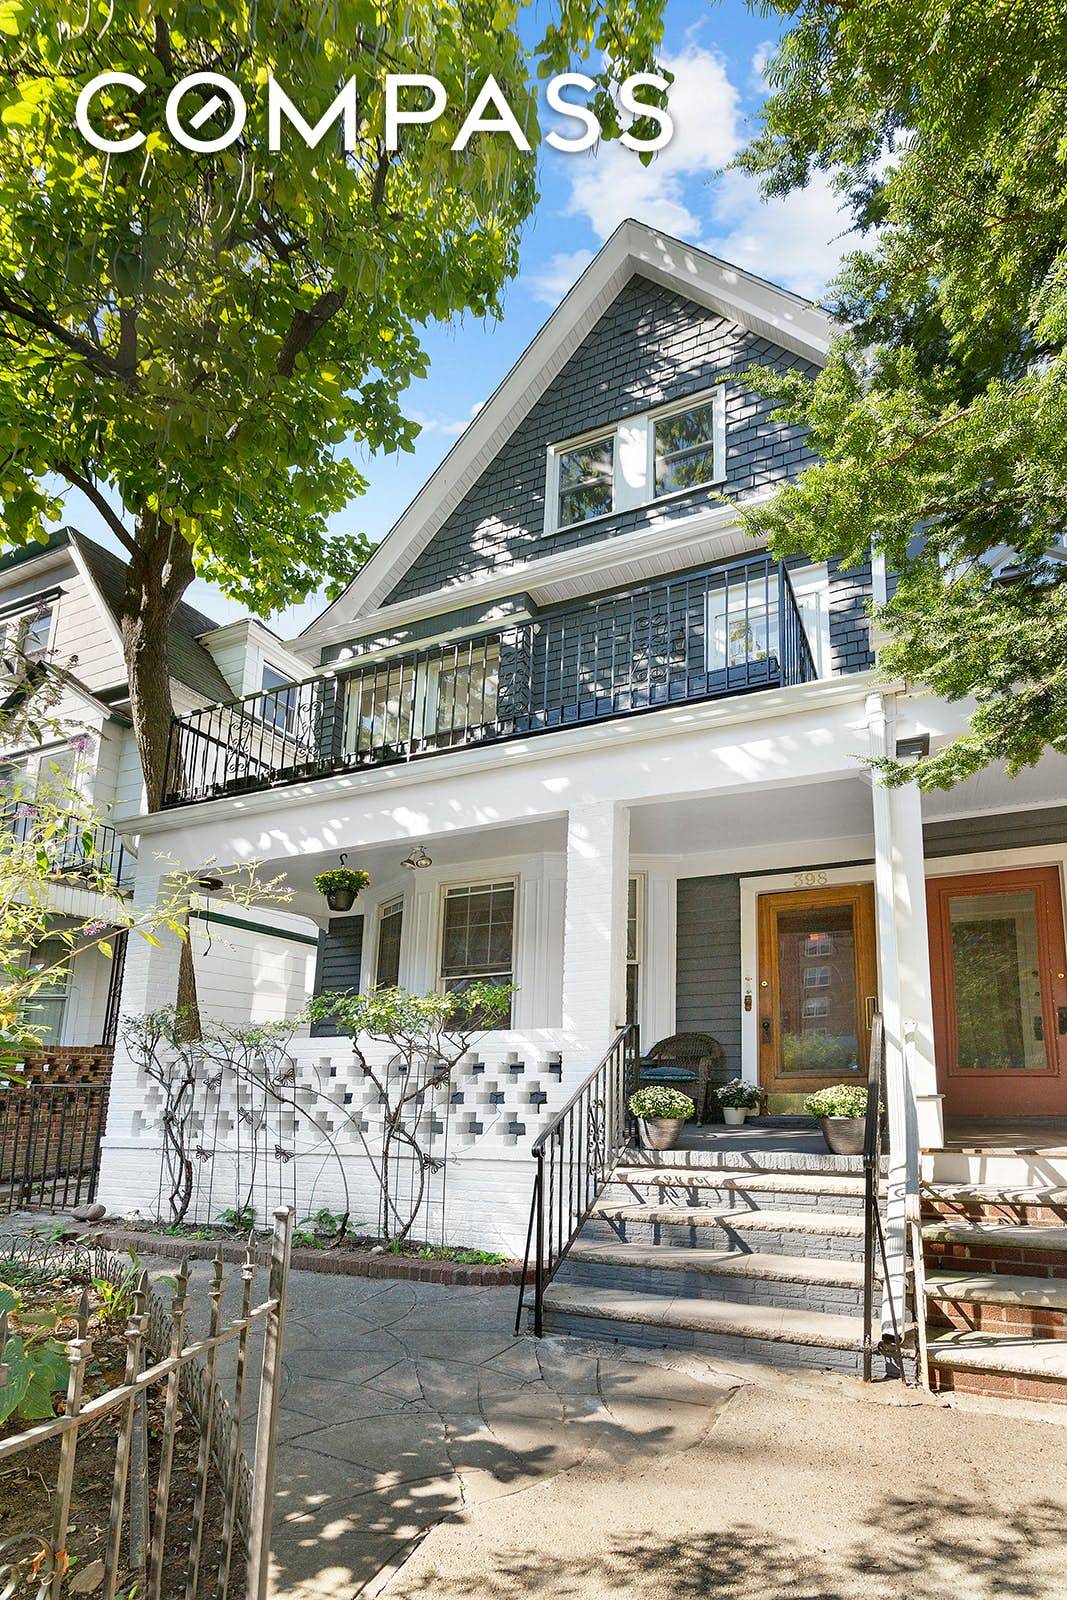 This elegant, semi detached two family Victorian with a classic front porch is configured as a spacious 3 bedroom duplex with backyard access and 2 outdoor decks, over a lovely ...